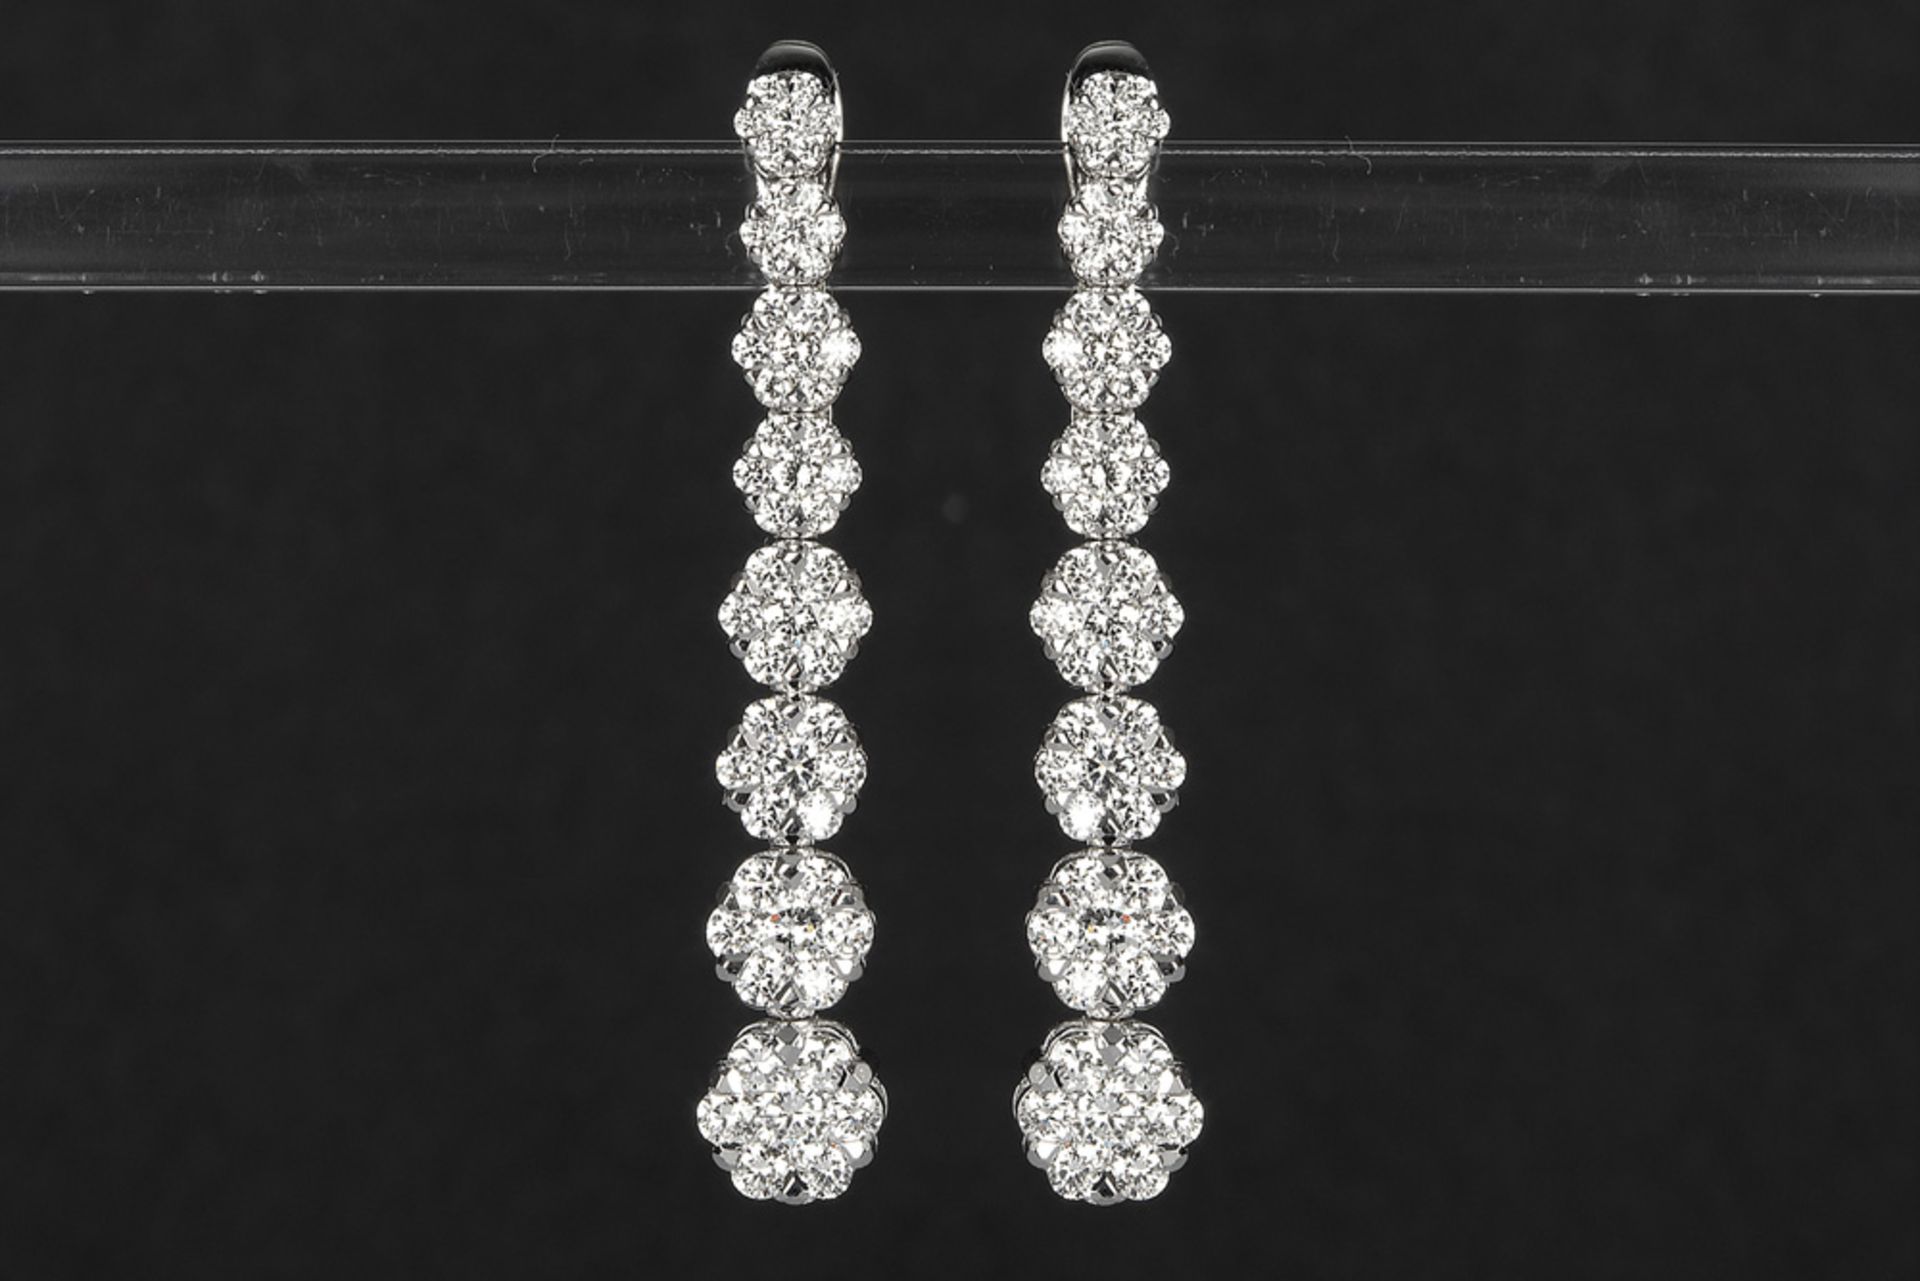 pair of earrings in white gold (18 carat) with at least 1,85 carat of very high quality brilliant